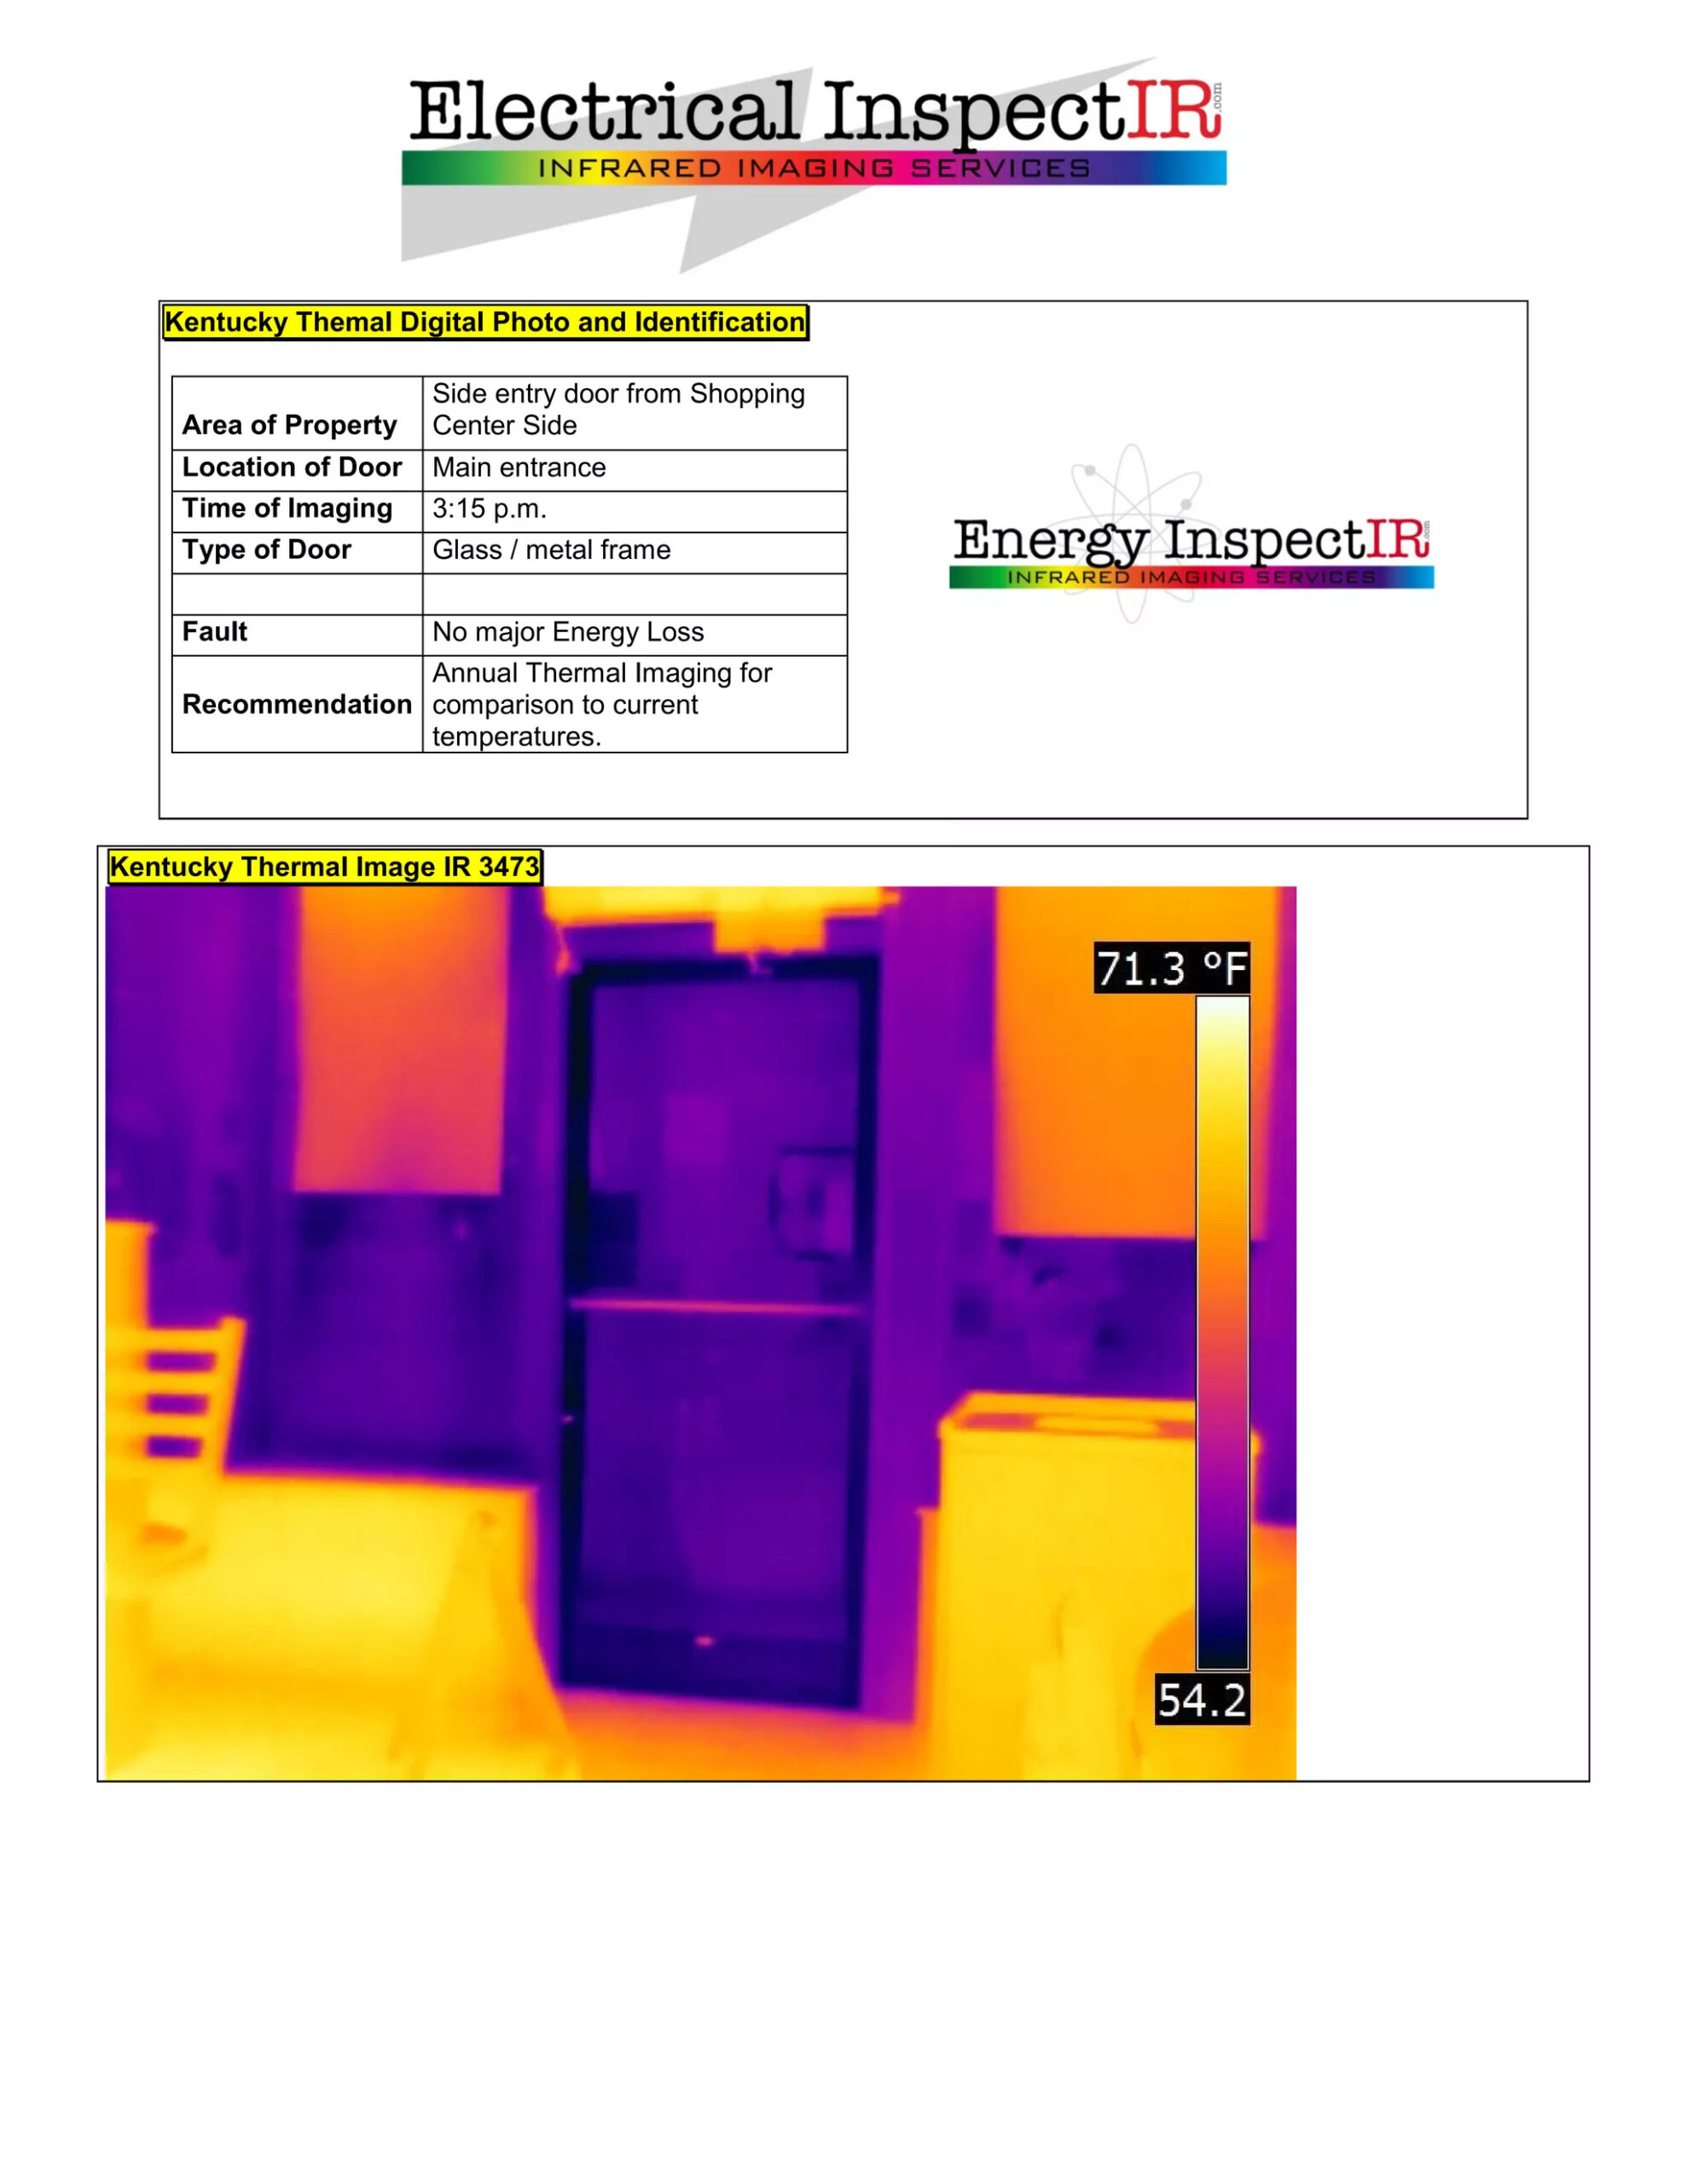 Electrical inspect ir sample report For Thermal Imaging Report Template